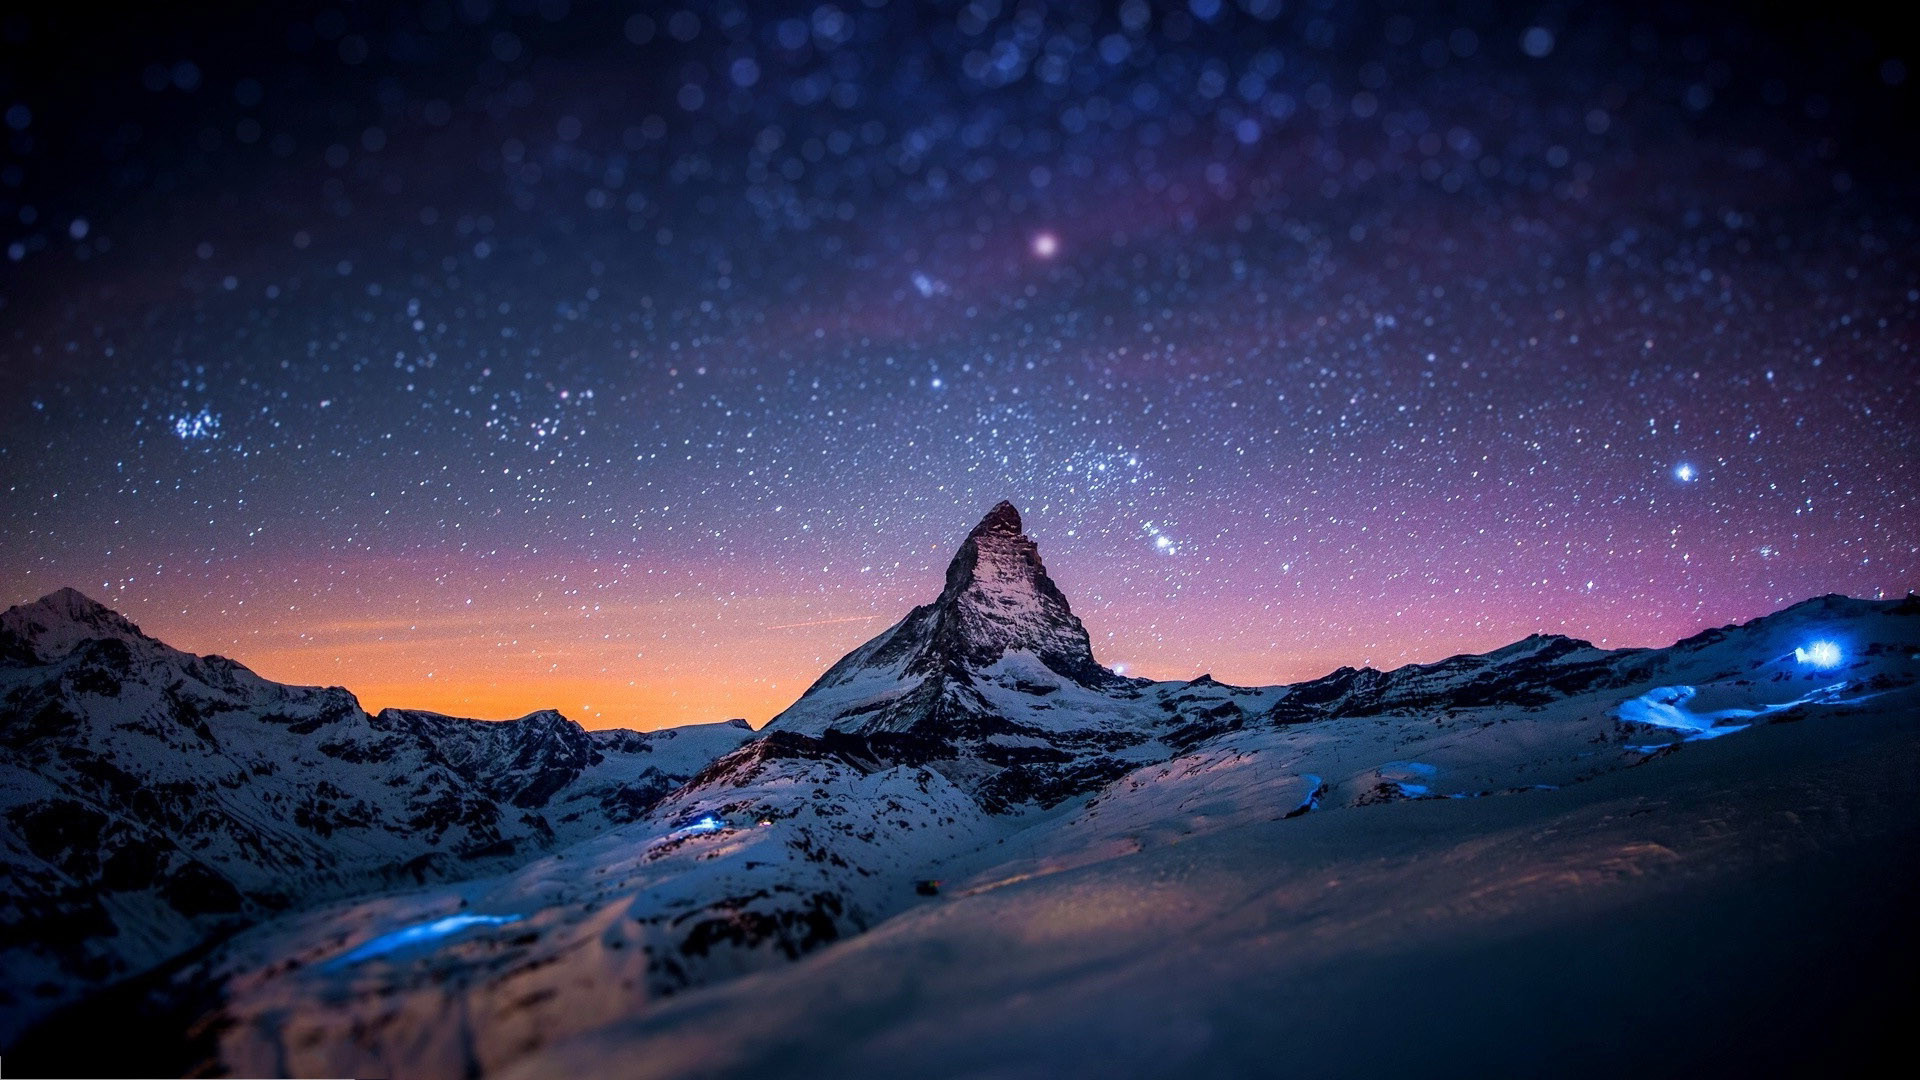 Mountain Night Wallpaper 64 Images Peaceful Hd Practical 9 20260 1920x1080